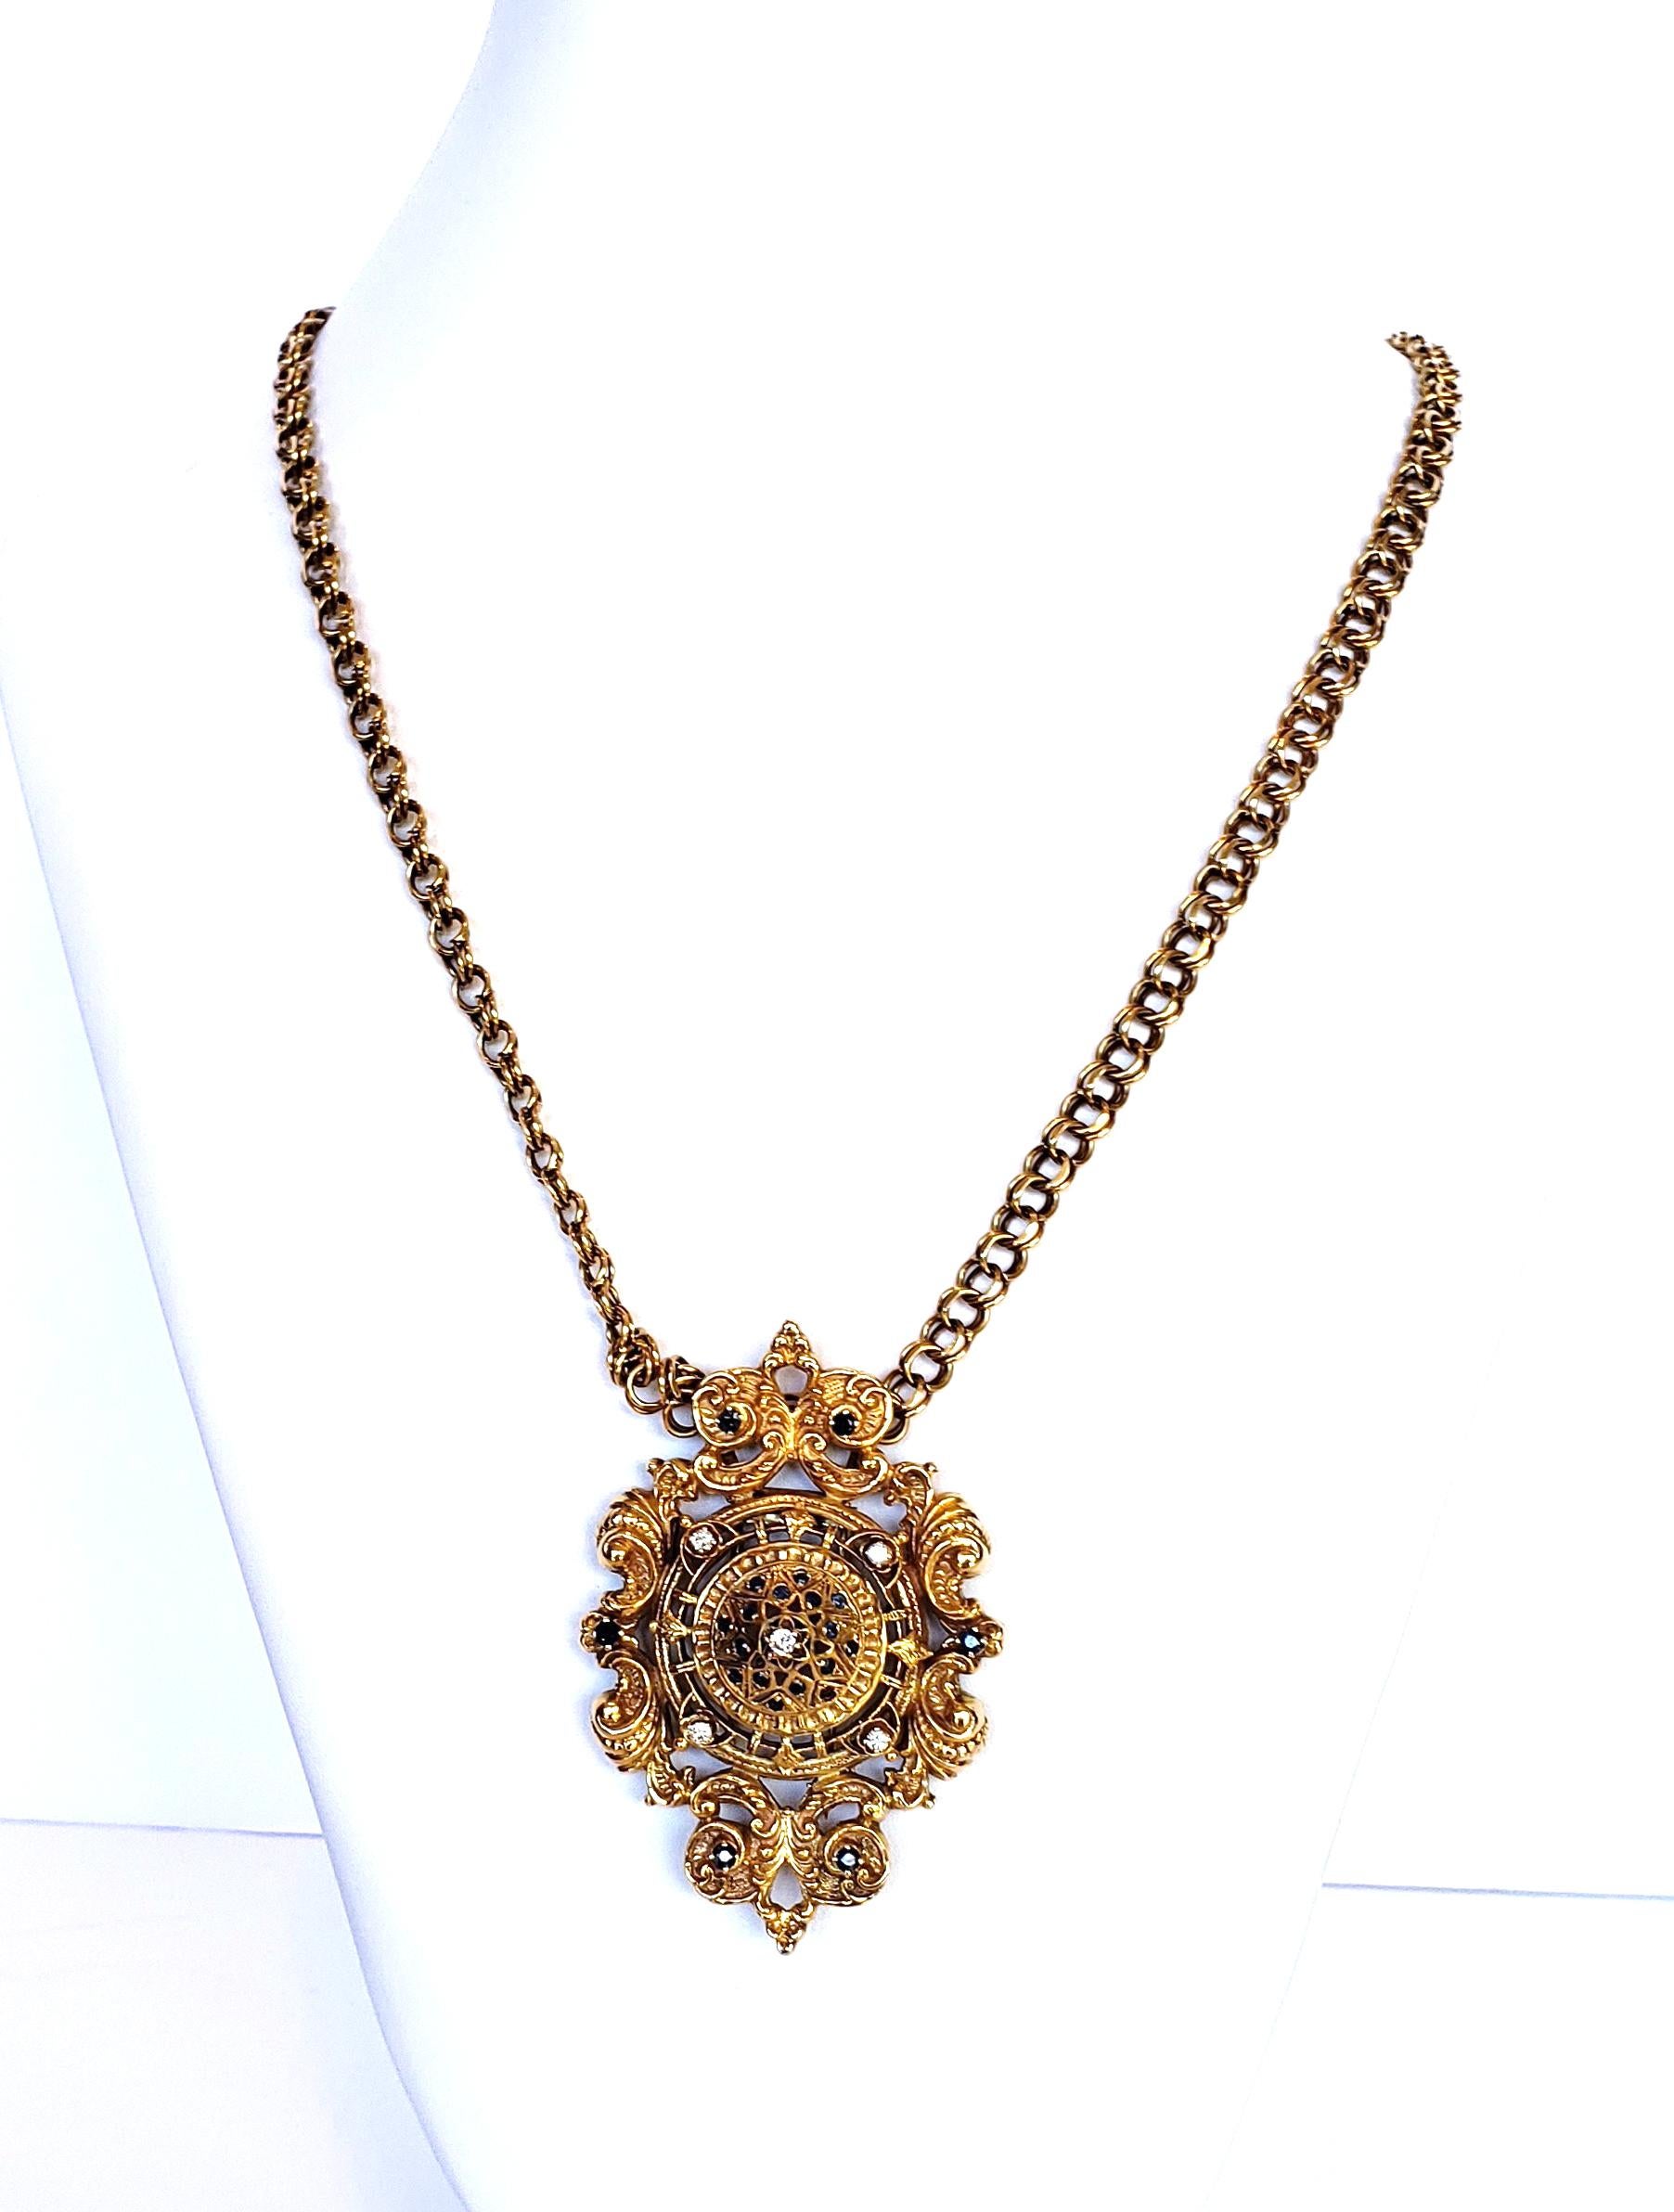 Beautiful 14 karat gold pendant/brooch inset with diamonds and sapphires suspended on a double circular linked chain.
United States Circa 1960

Weight:  80.8 Grams   
Size:  Pendant:  H:  3 1/4”  W:  2 1/4”  Chain: 27”
Total length with pendant:  30